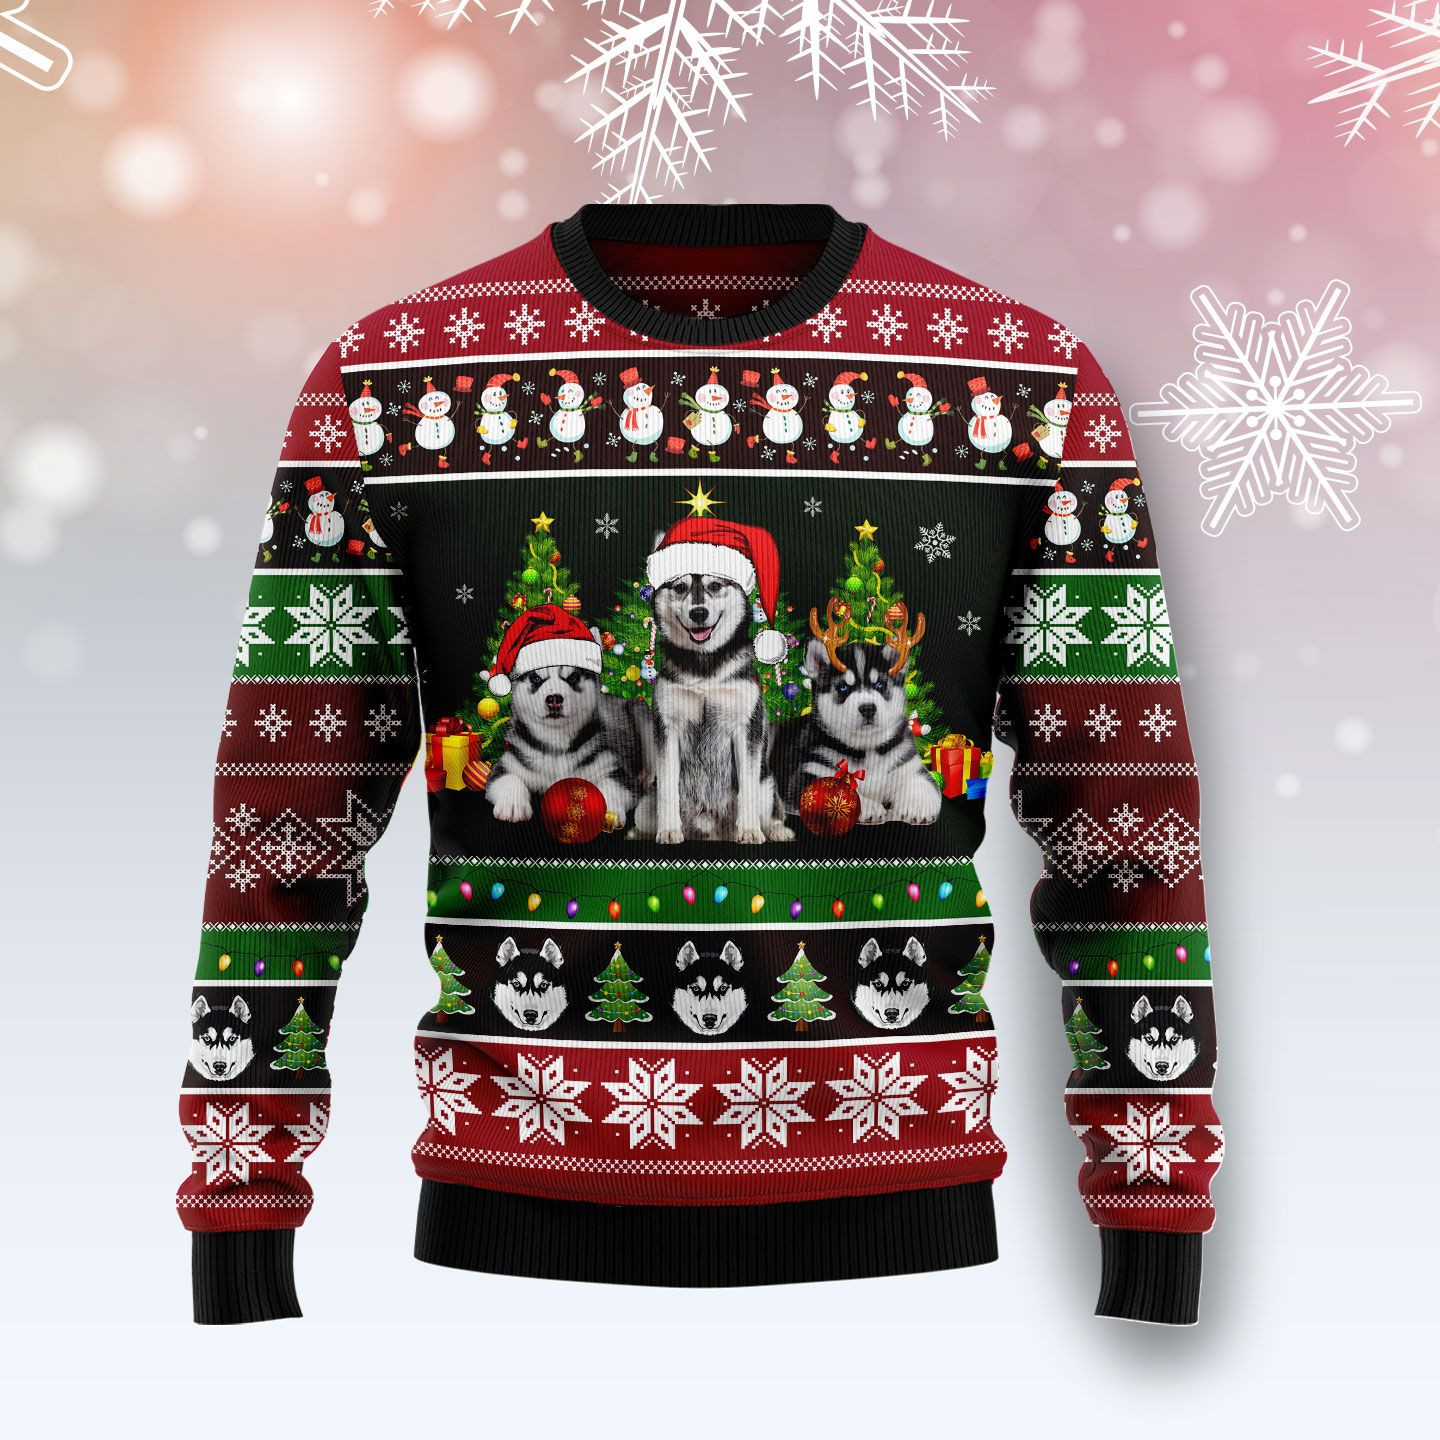 Siberian Husky Group Beauty Ugly Christmas Sweater Ugly Sweater For Men Women, Holiday Sweater